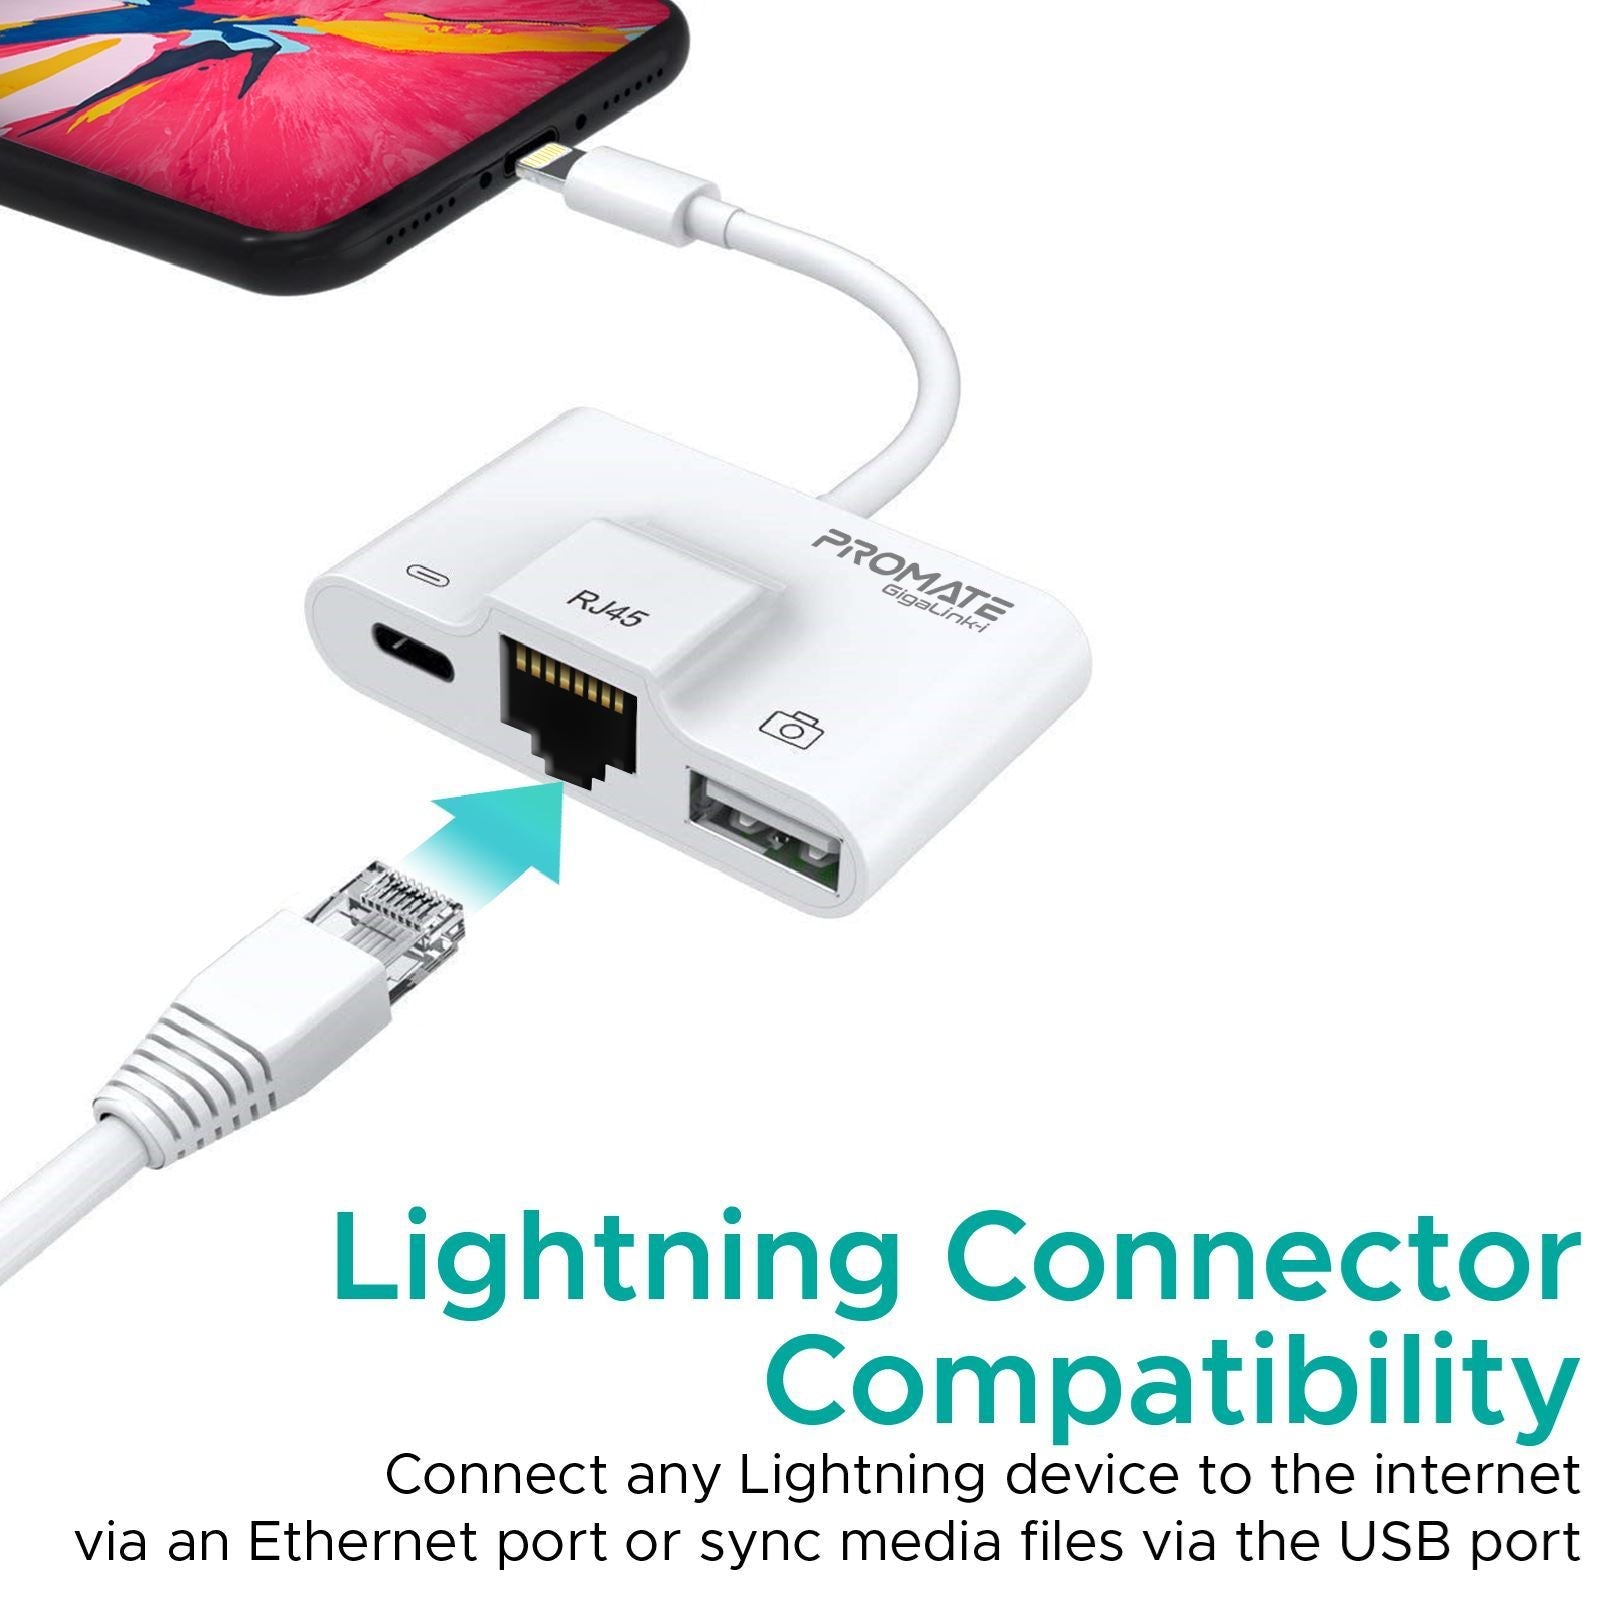 PROMATE_3-in-1_OTG_Lightning_Hub._Input_RJ45,_USB_3.0_Port,_Lightning_Port._Output_Lightning_Connector._Ethernet_Bandwidth_100Mbps_and_Downwards_Compatible._Compact_July_Sale_-_20%_OFF 1322